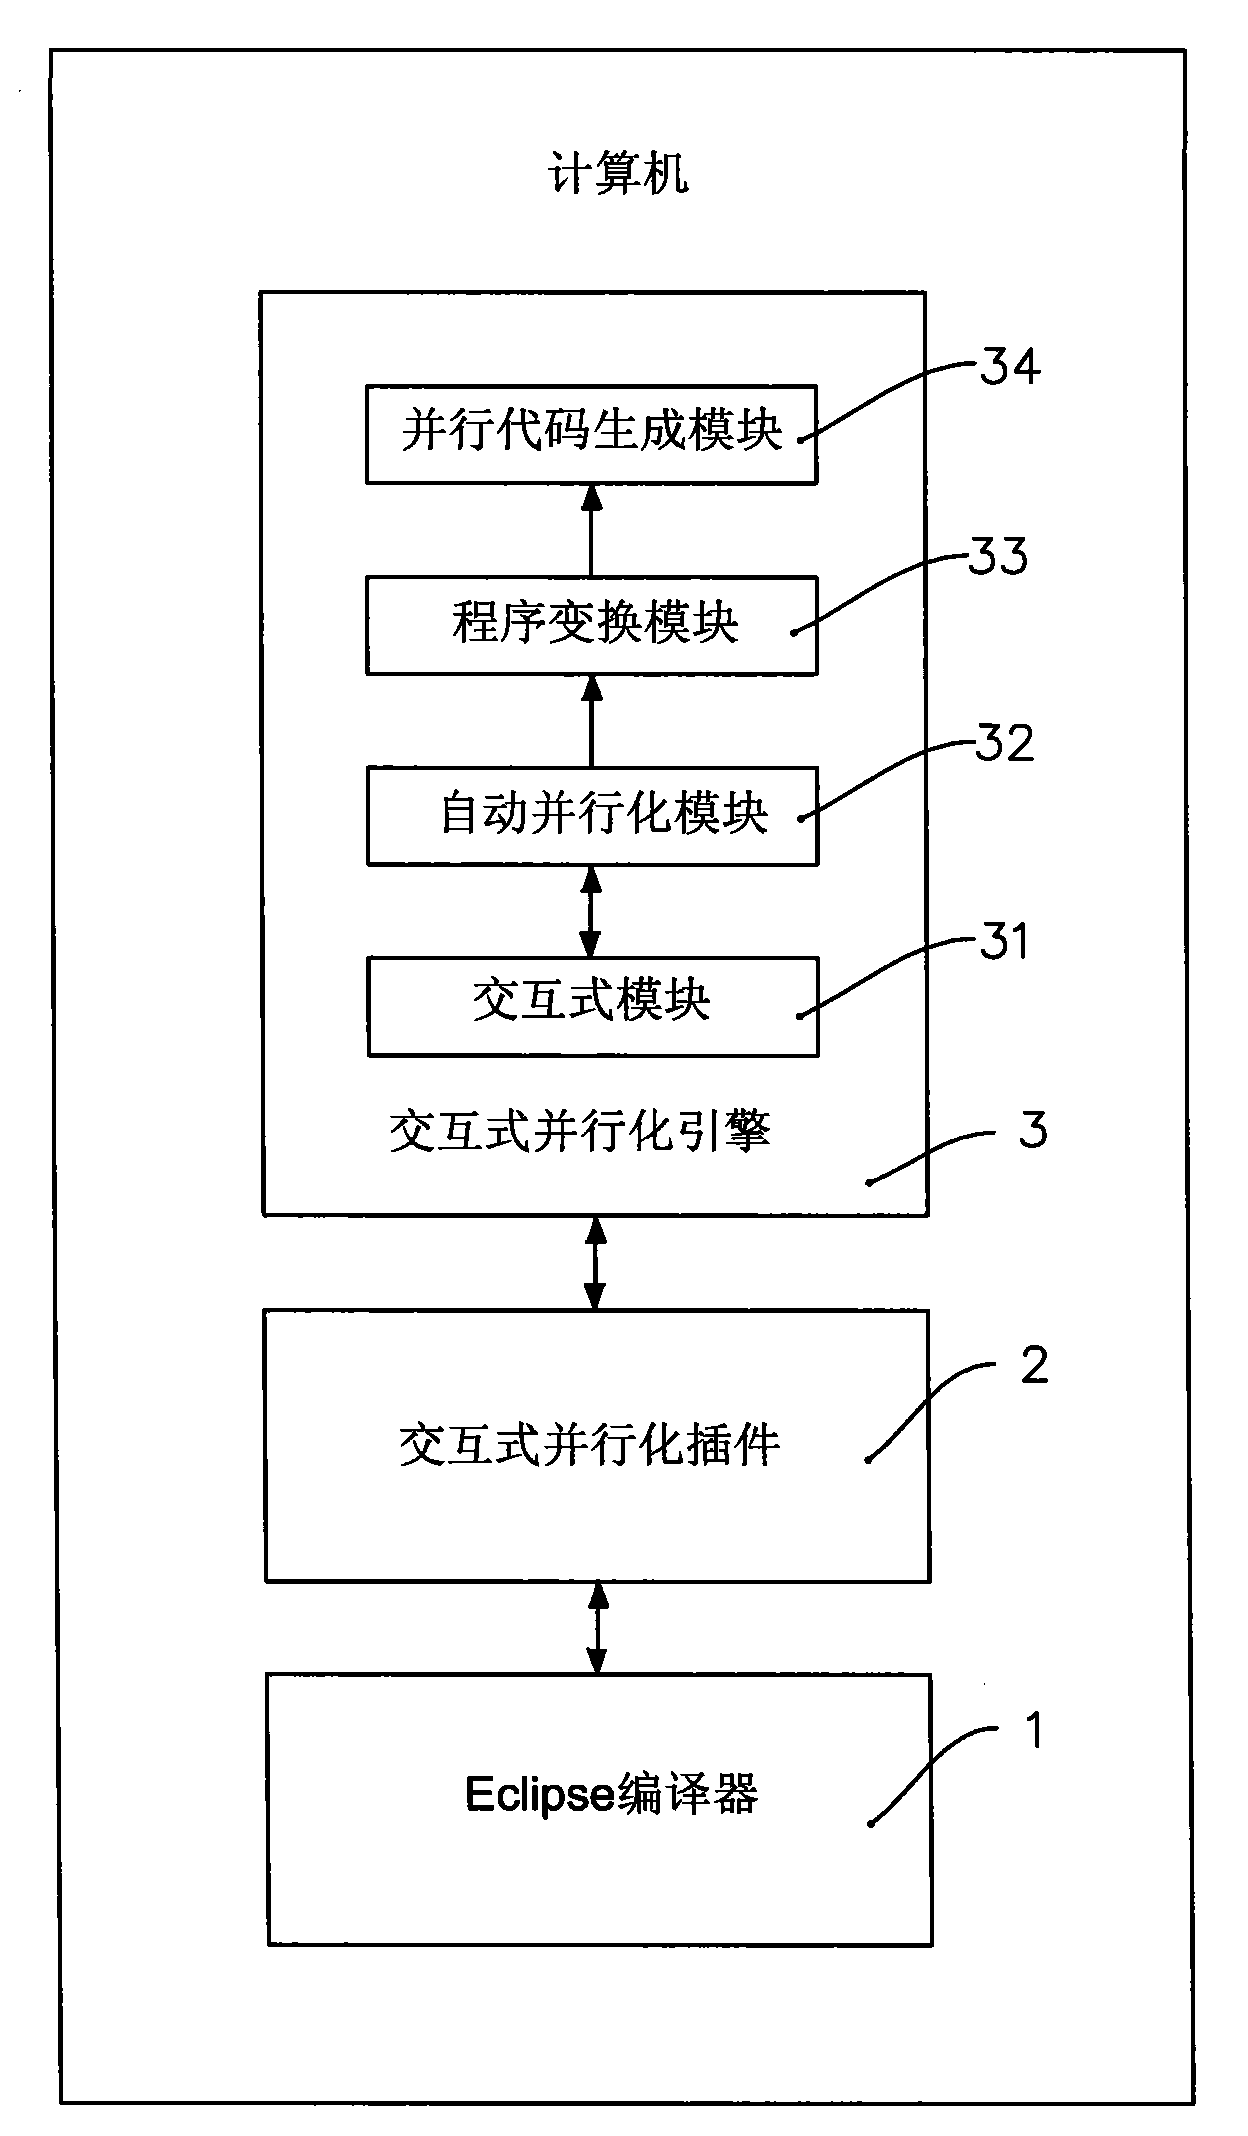 Interactive parallelization compiling system and compiling method thereof